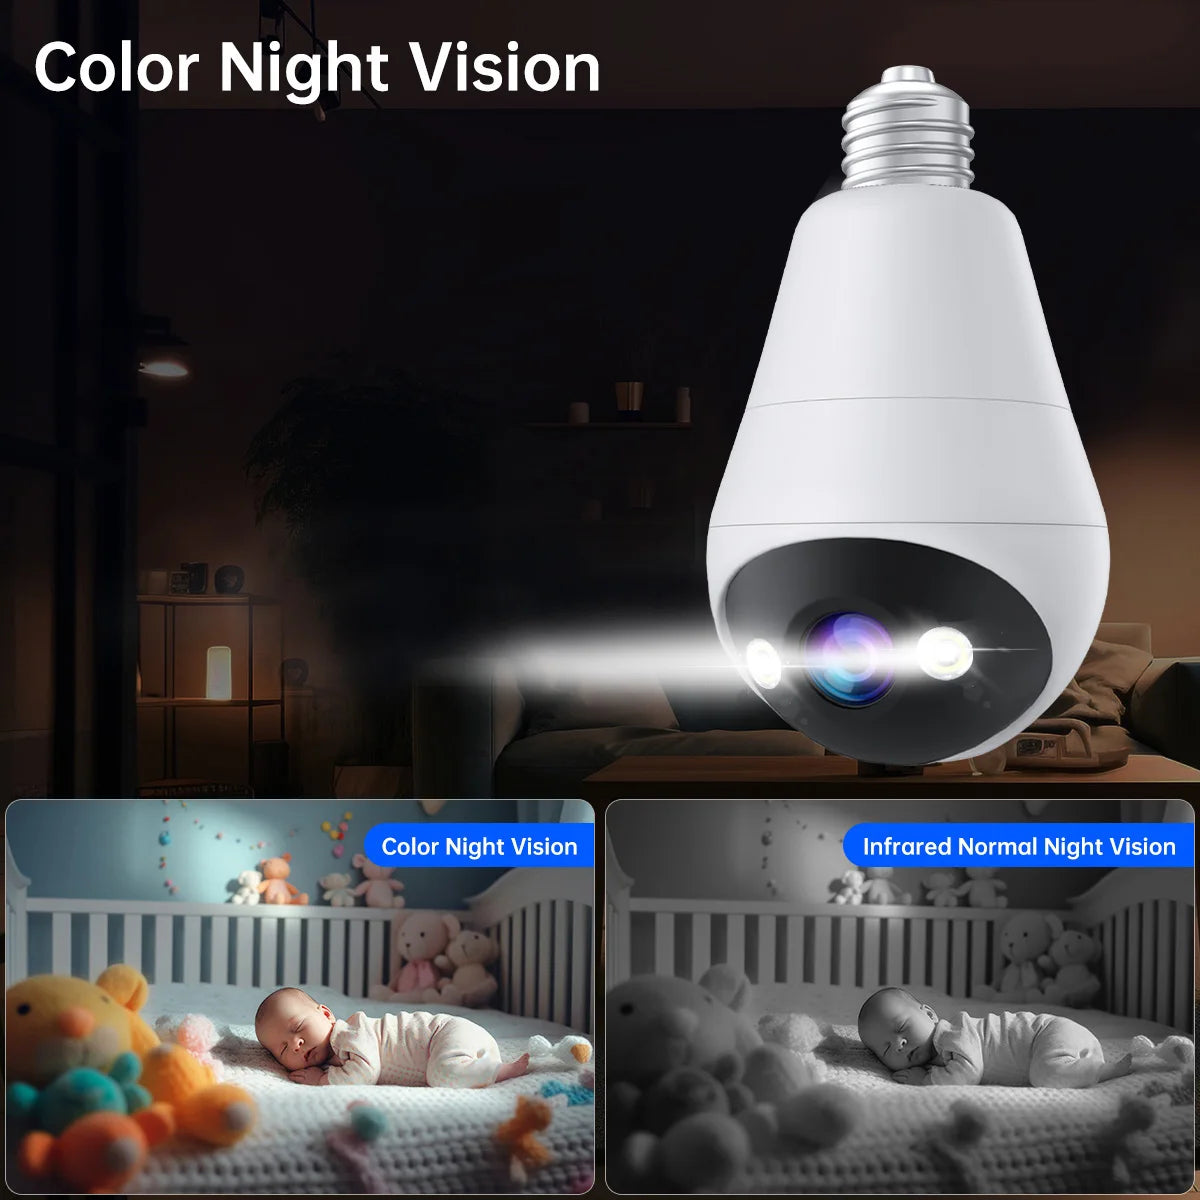 JOOAN 2K 3MP E27 Bulb Camera WiFi Indoor Video Surveillance Home Security Monitor Full Color Night Vision Auto Tracking